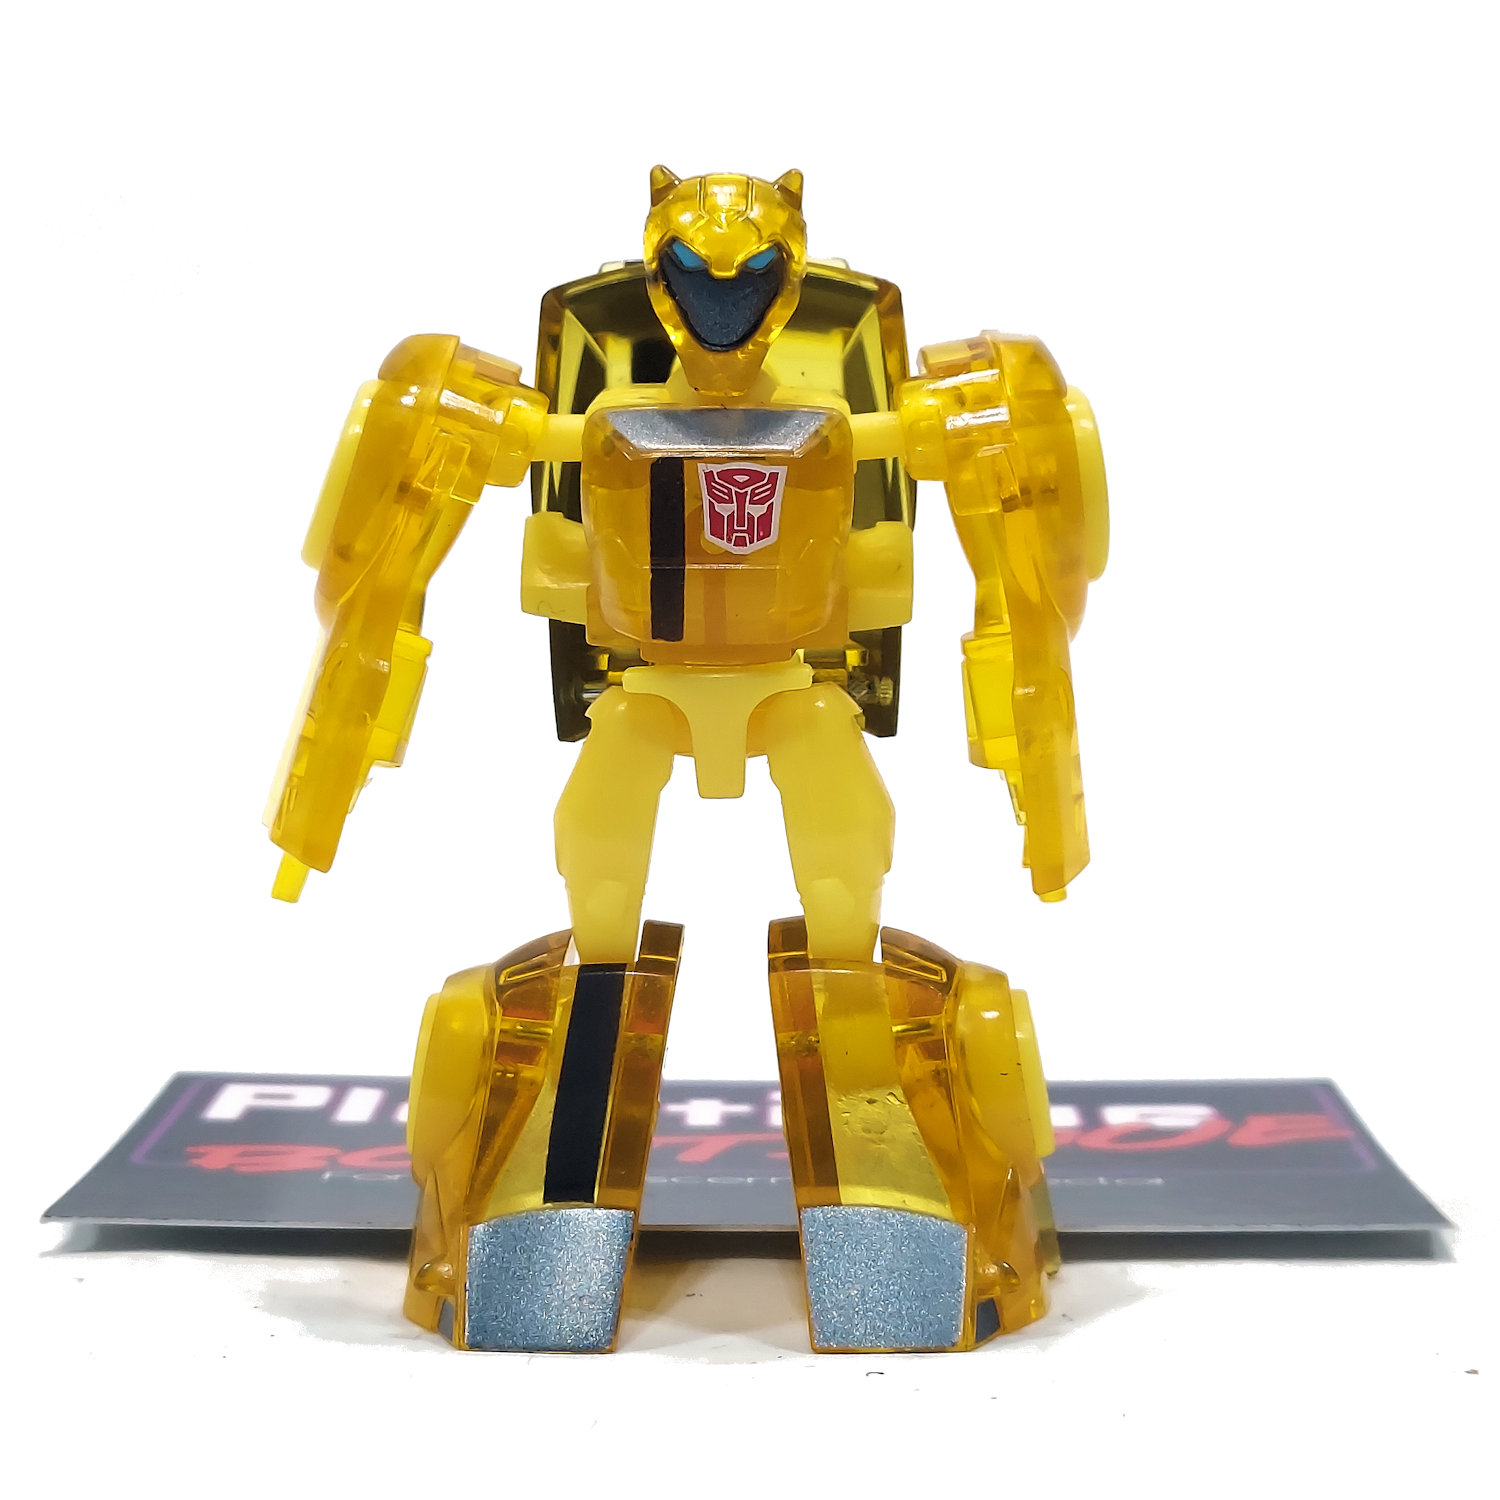  Transformers Animated EZ Collection Bumblebee FAMILY MART LEGENDS EHOBBY CLEAR 